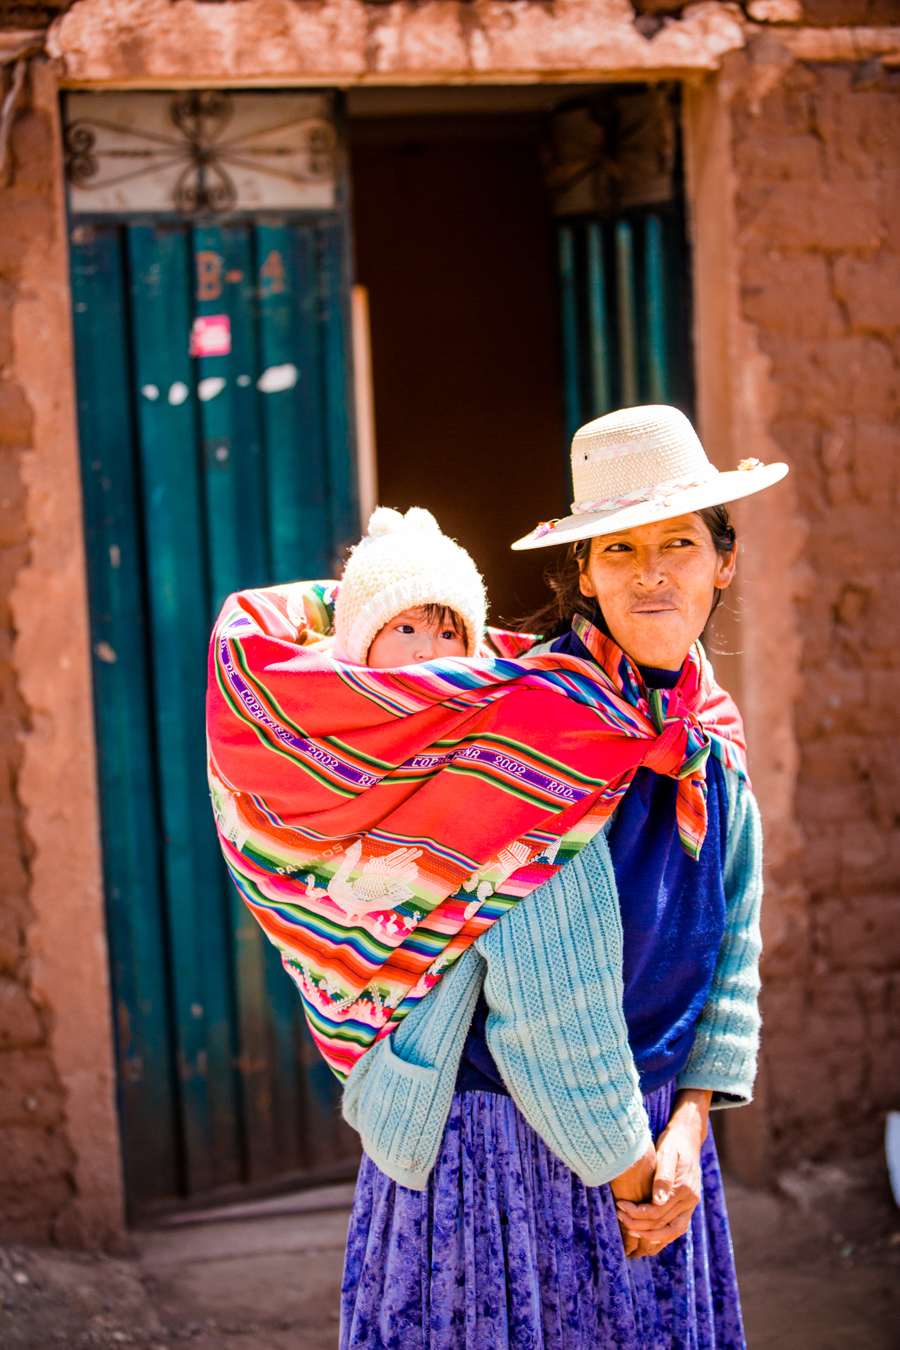 Woman Carrying Child in Peru